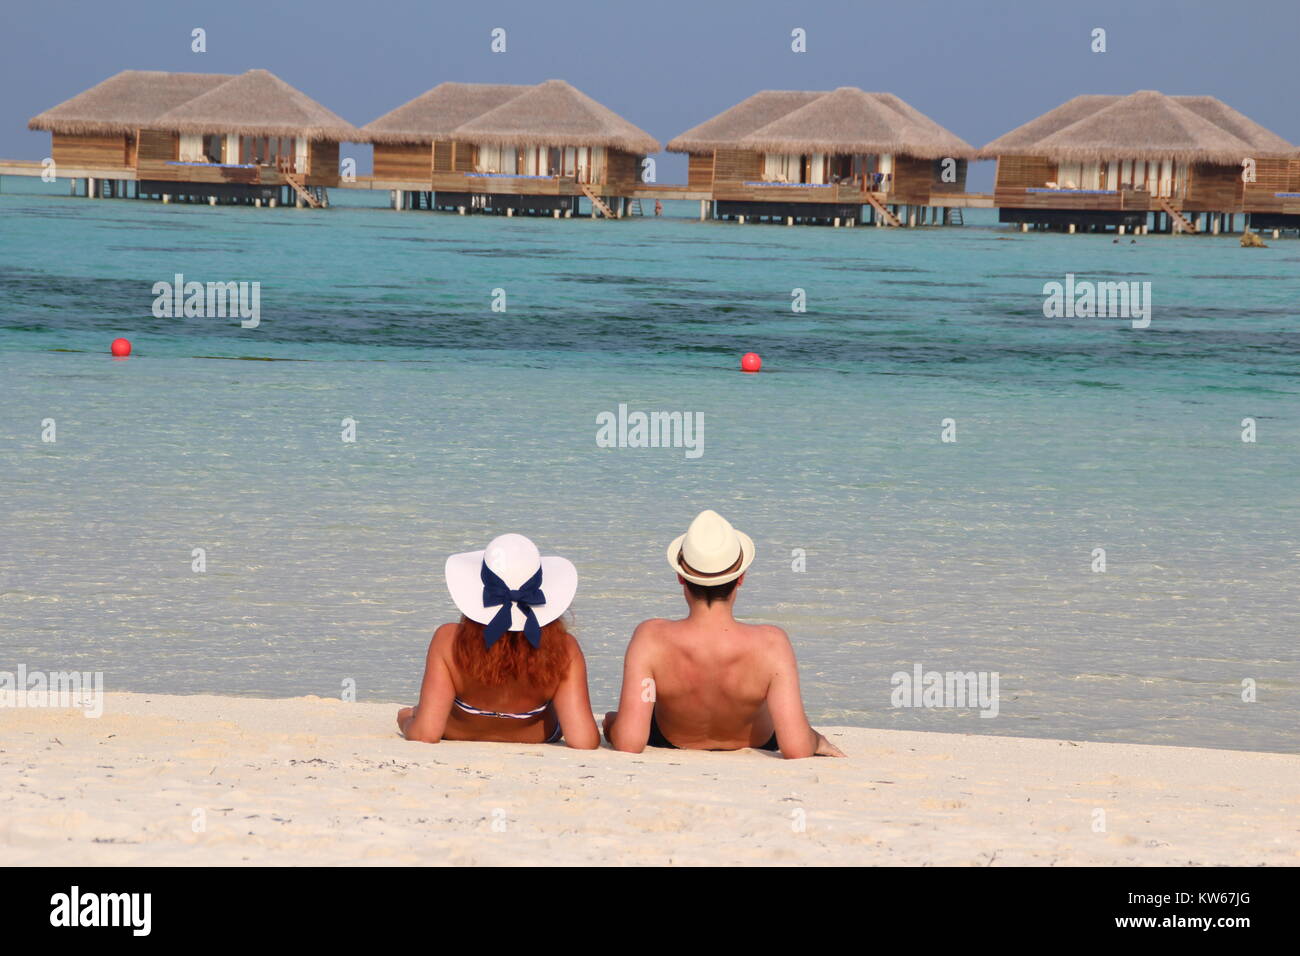 People from the back on beach in the Maldives Stock Photo